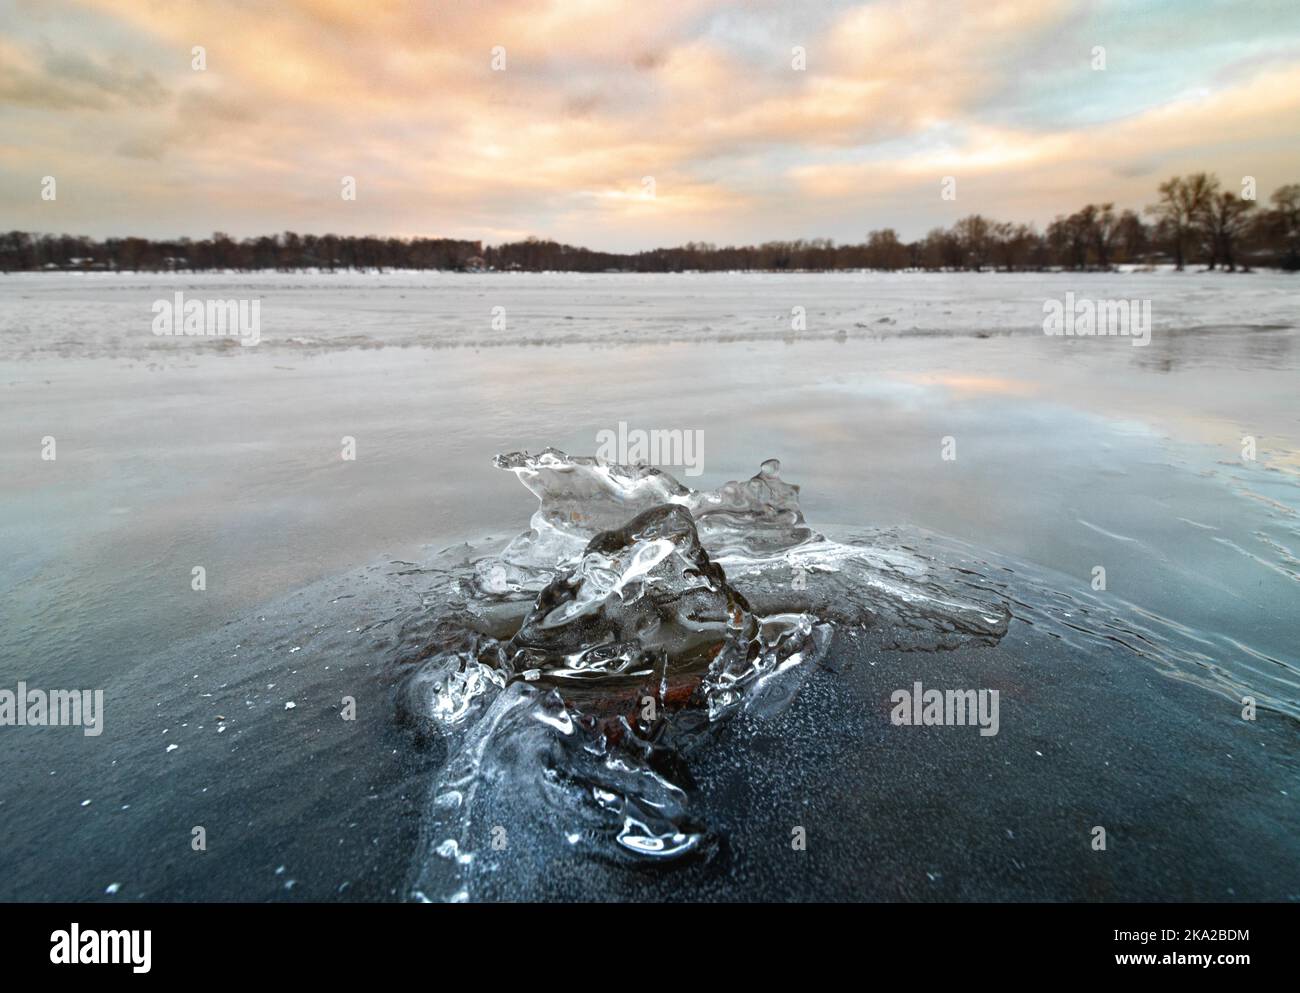 An ice composition at frozen lake Beloye in winter with a sunset background Stock Photo